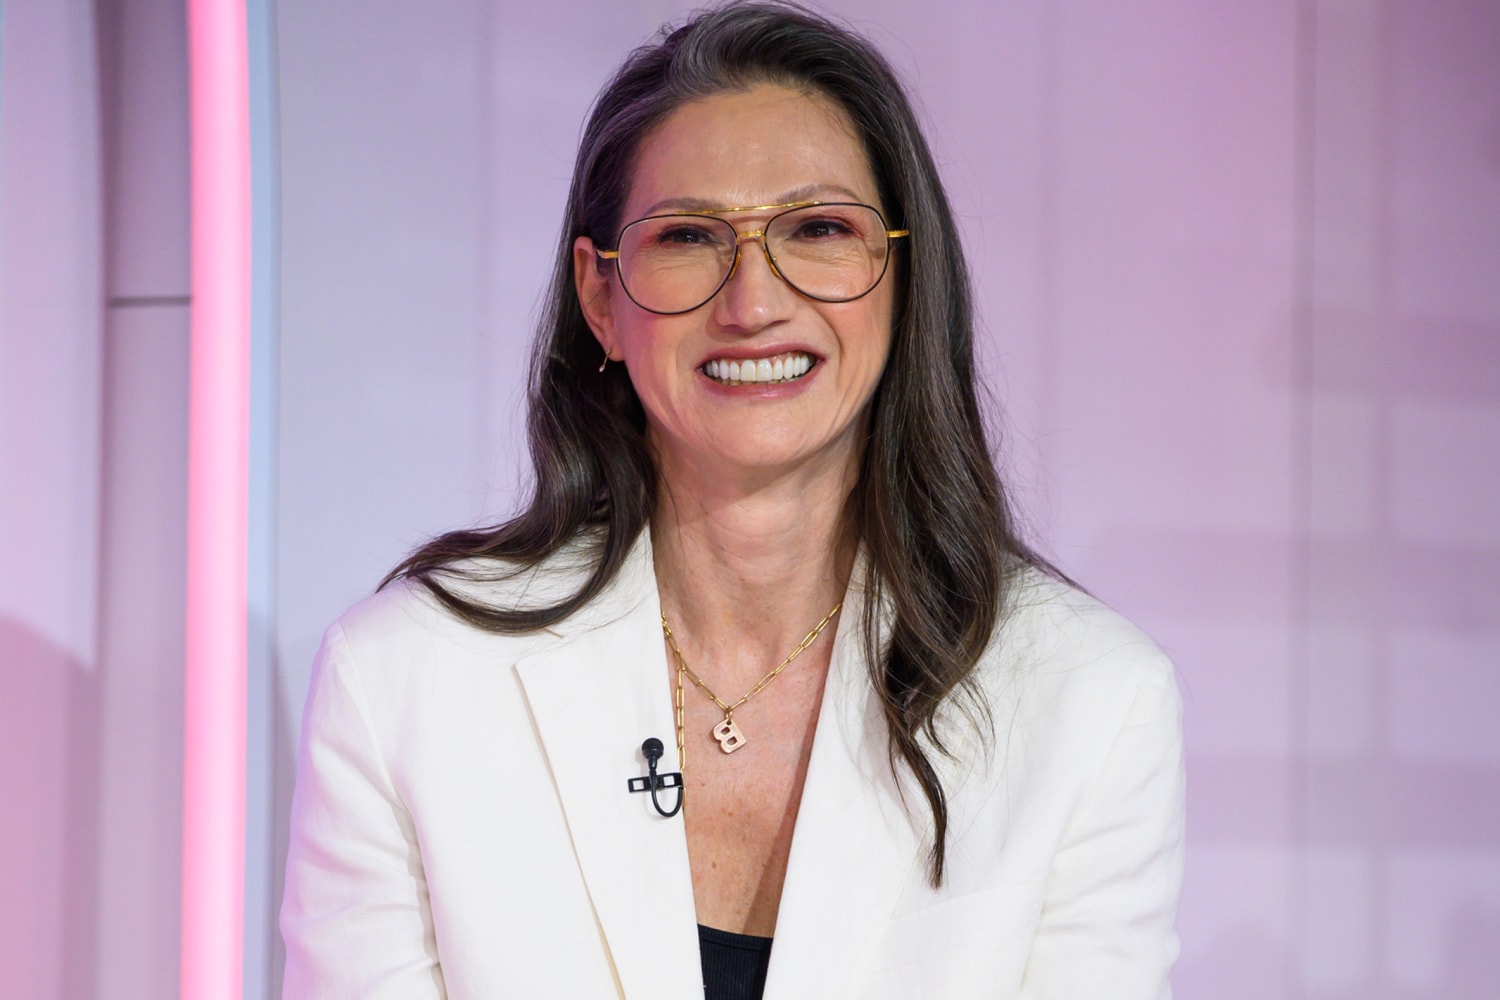 How RHONY's Jenna Lyons became a great Real Housewife - Vox